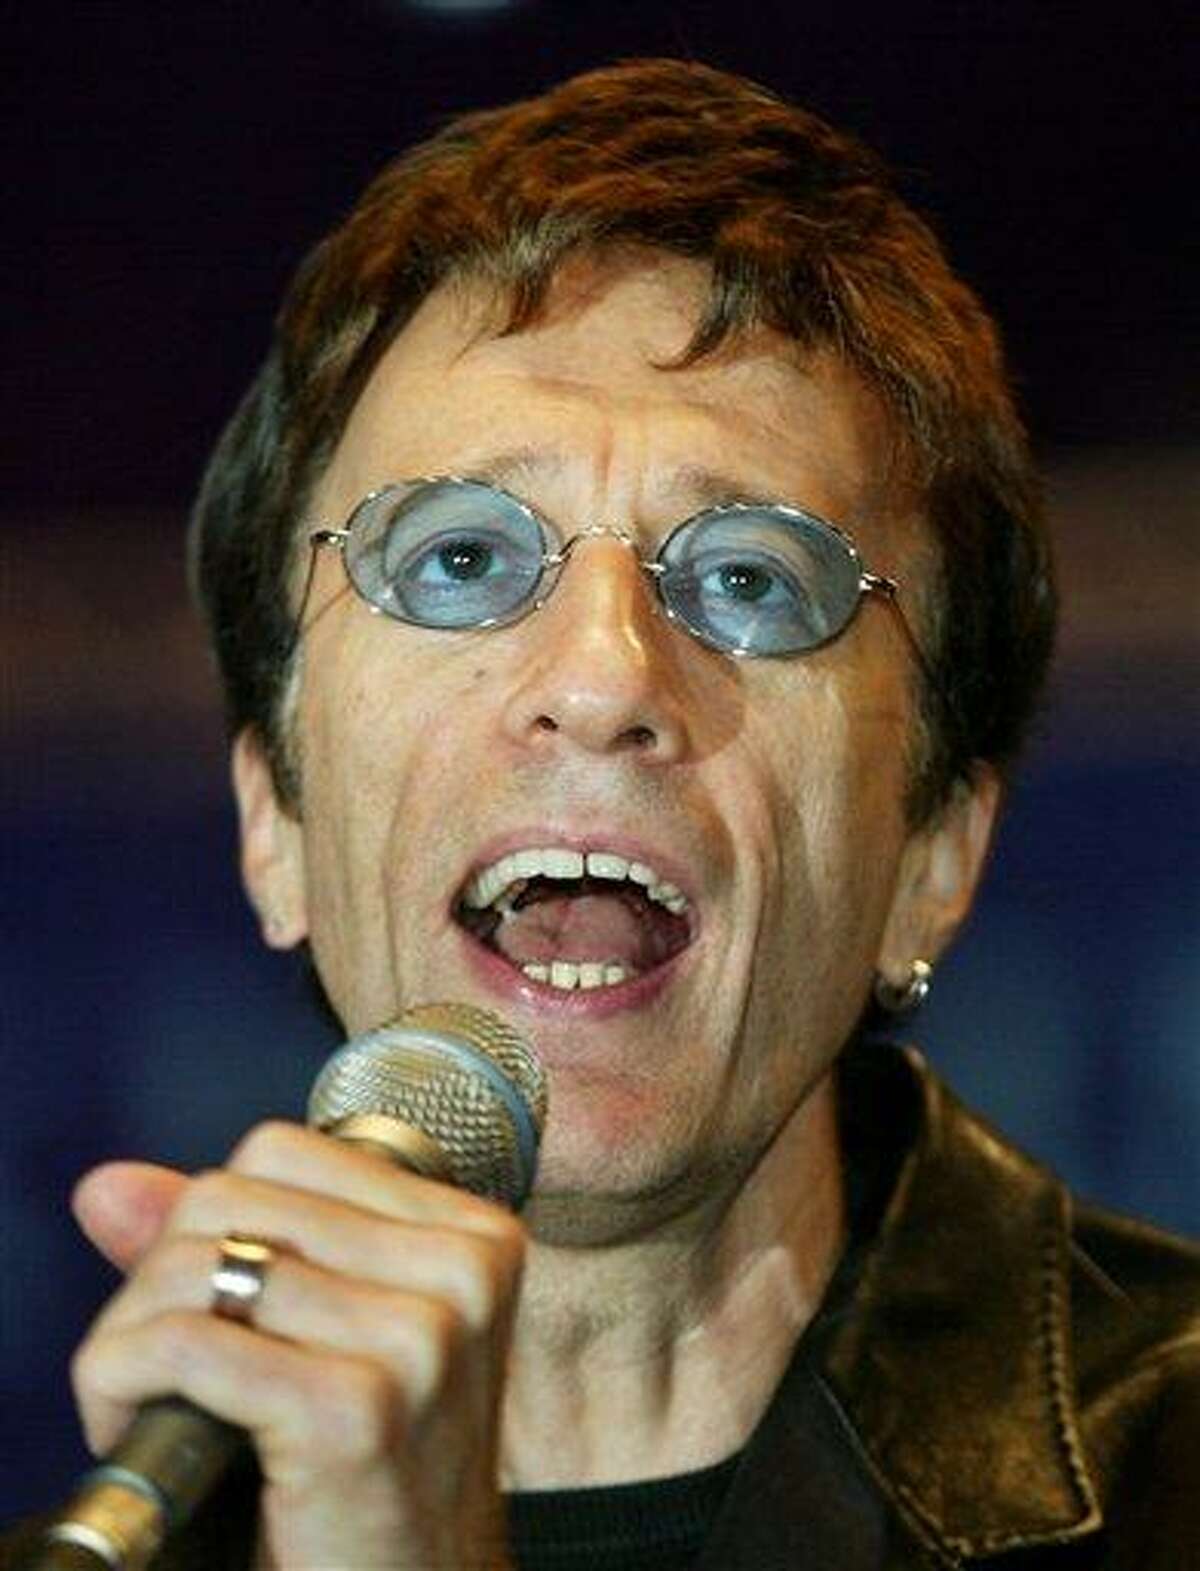 FILE This Saturday, Sept. 25, 2004, file photo shows former Bee Gees singer Robin Gibb, performing a song at the beginning of a show match between former German tennis star Steffi Graf and Argentina's Gabriela Sabatini at the Max-Schmeling-Halle hall on in Berlin. British media reports said Saturday April 14, 2012 former Bee Gee Robin Gibb is gravely ill with pneumonia in a London hospital. The Sun newspaper reported Saturday that 62-year-old Gibb is in a coma, citing a family friend.(AP Photo/ Jan Bauer)